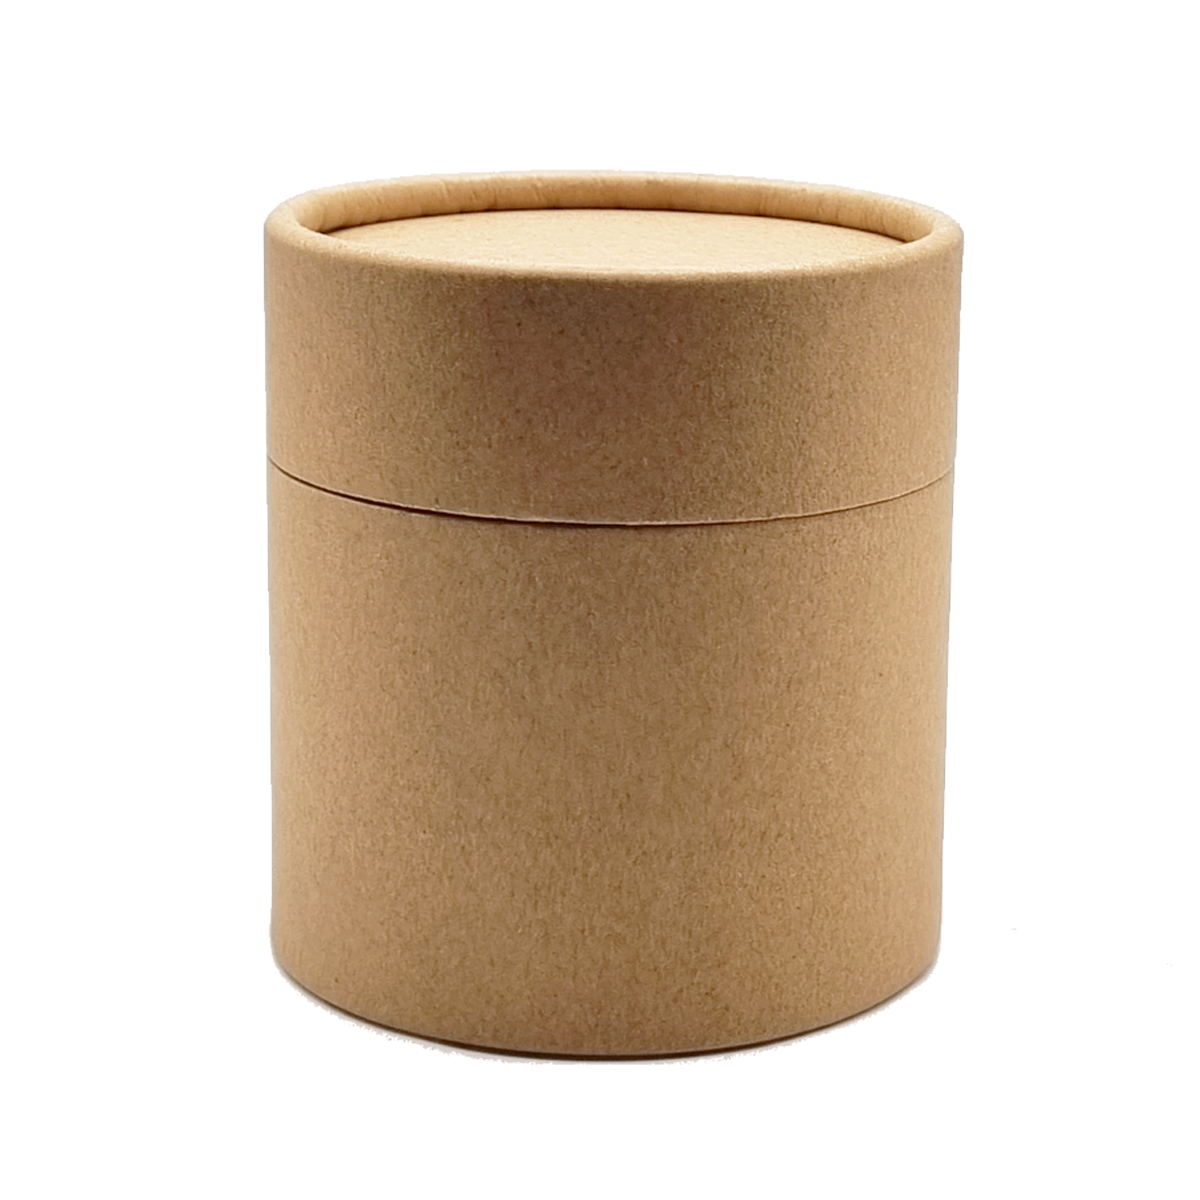 10Pc Pack Kraft Paperboard Tubes Round Kraft Paper Containers for Tea Caddy Coffee Cosmetic Crafts Gift Packaging Brown - Willow